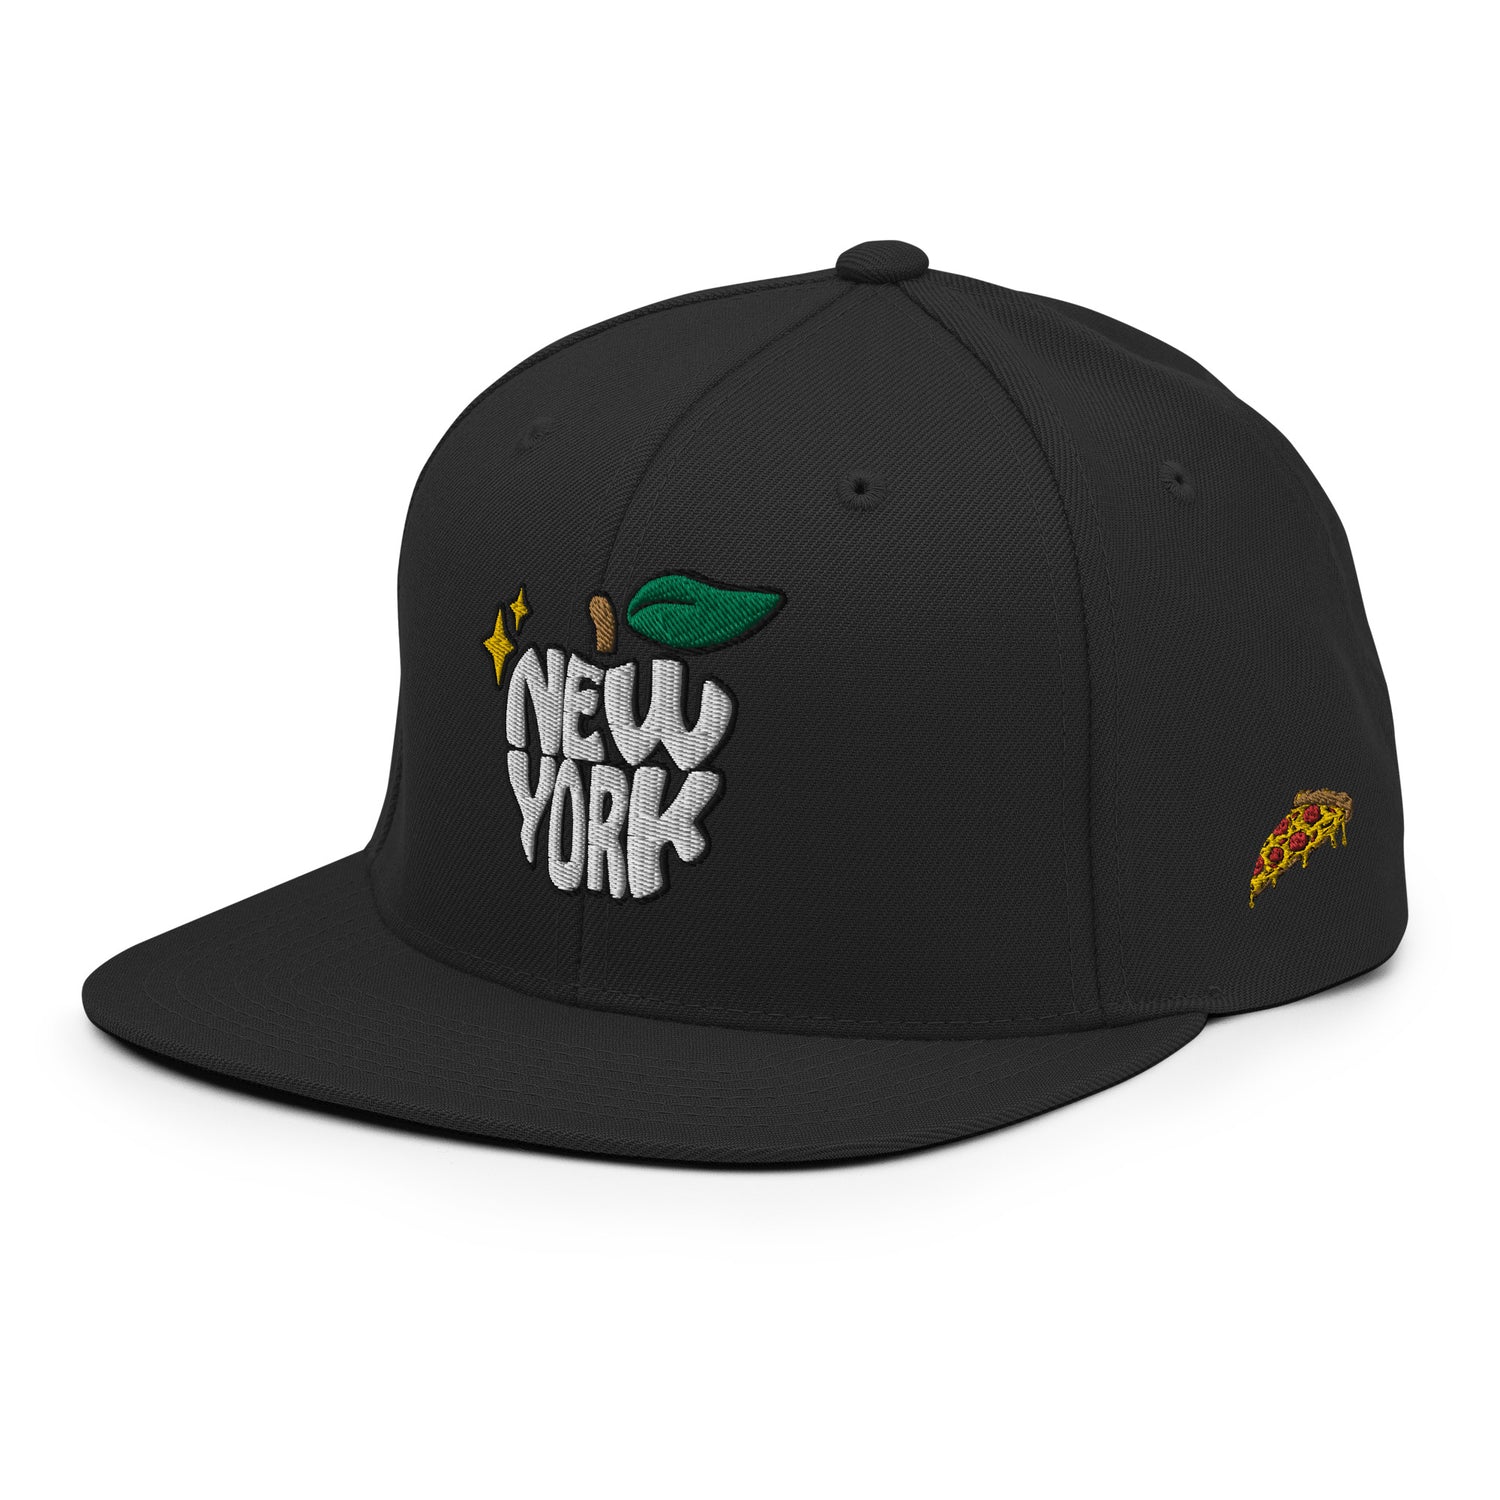 New York City Apple Logo Embroidered Black Snapback Hat (Pizza) Scattered Streetwear NYC